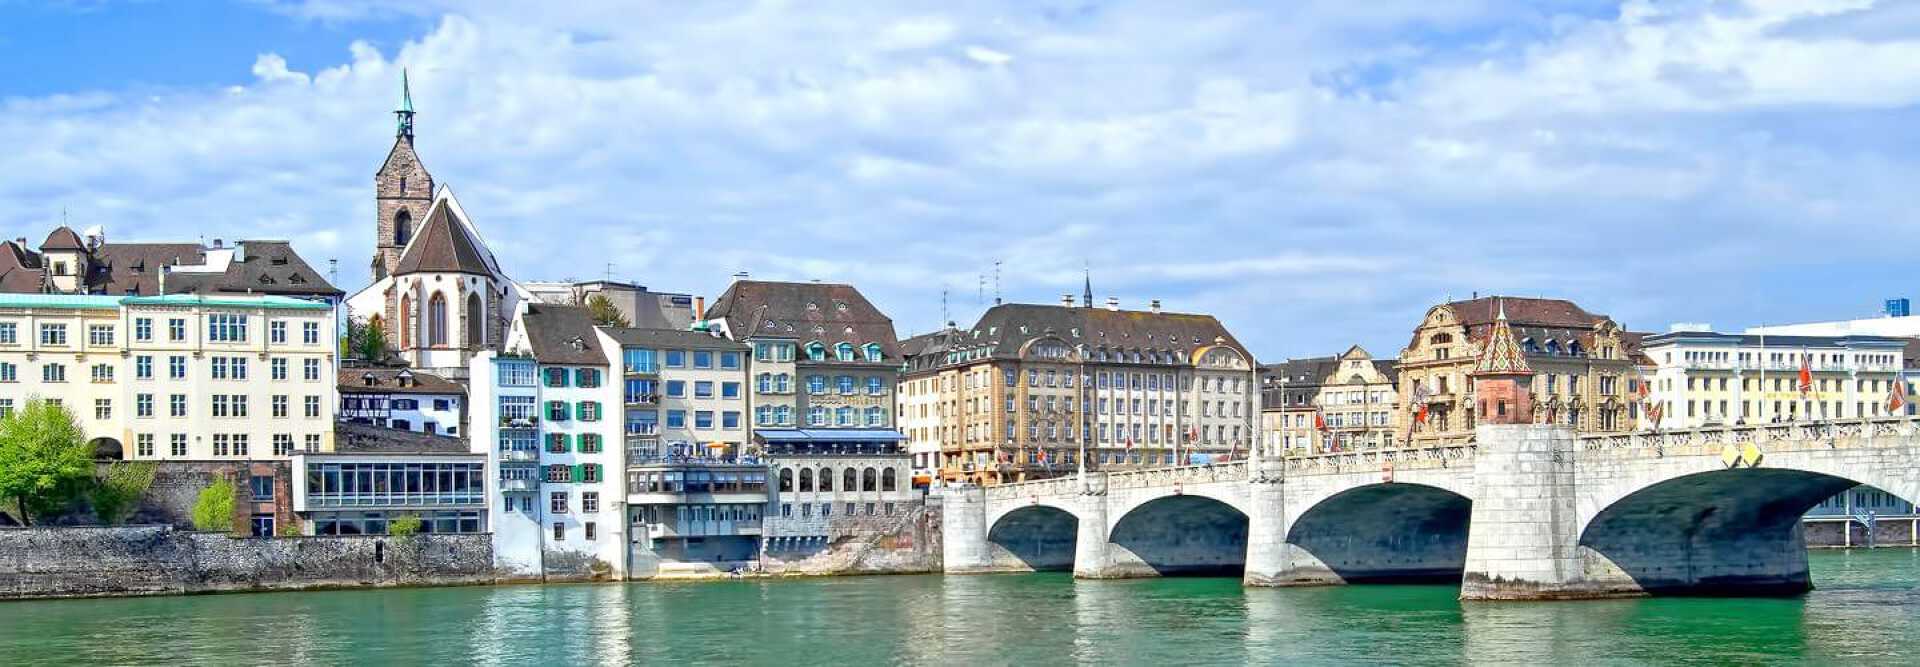 Bridge Mittlere Brücke on the Rhin with several buildings including the Martinskirche in Basel Switzerland